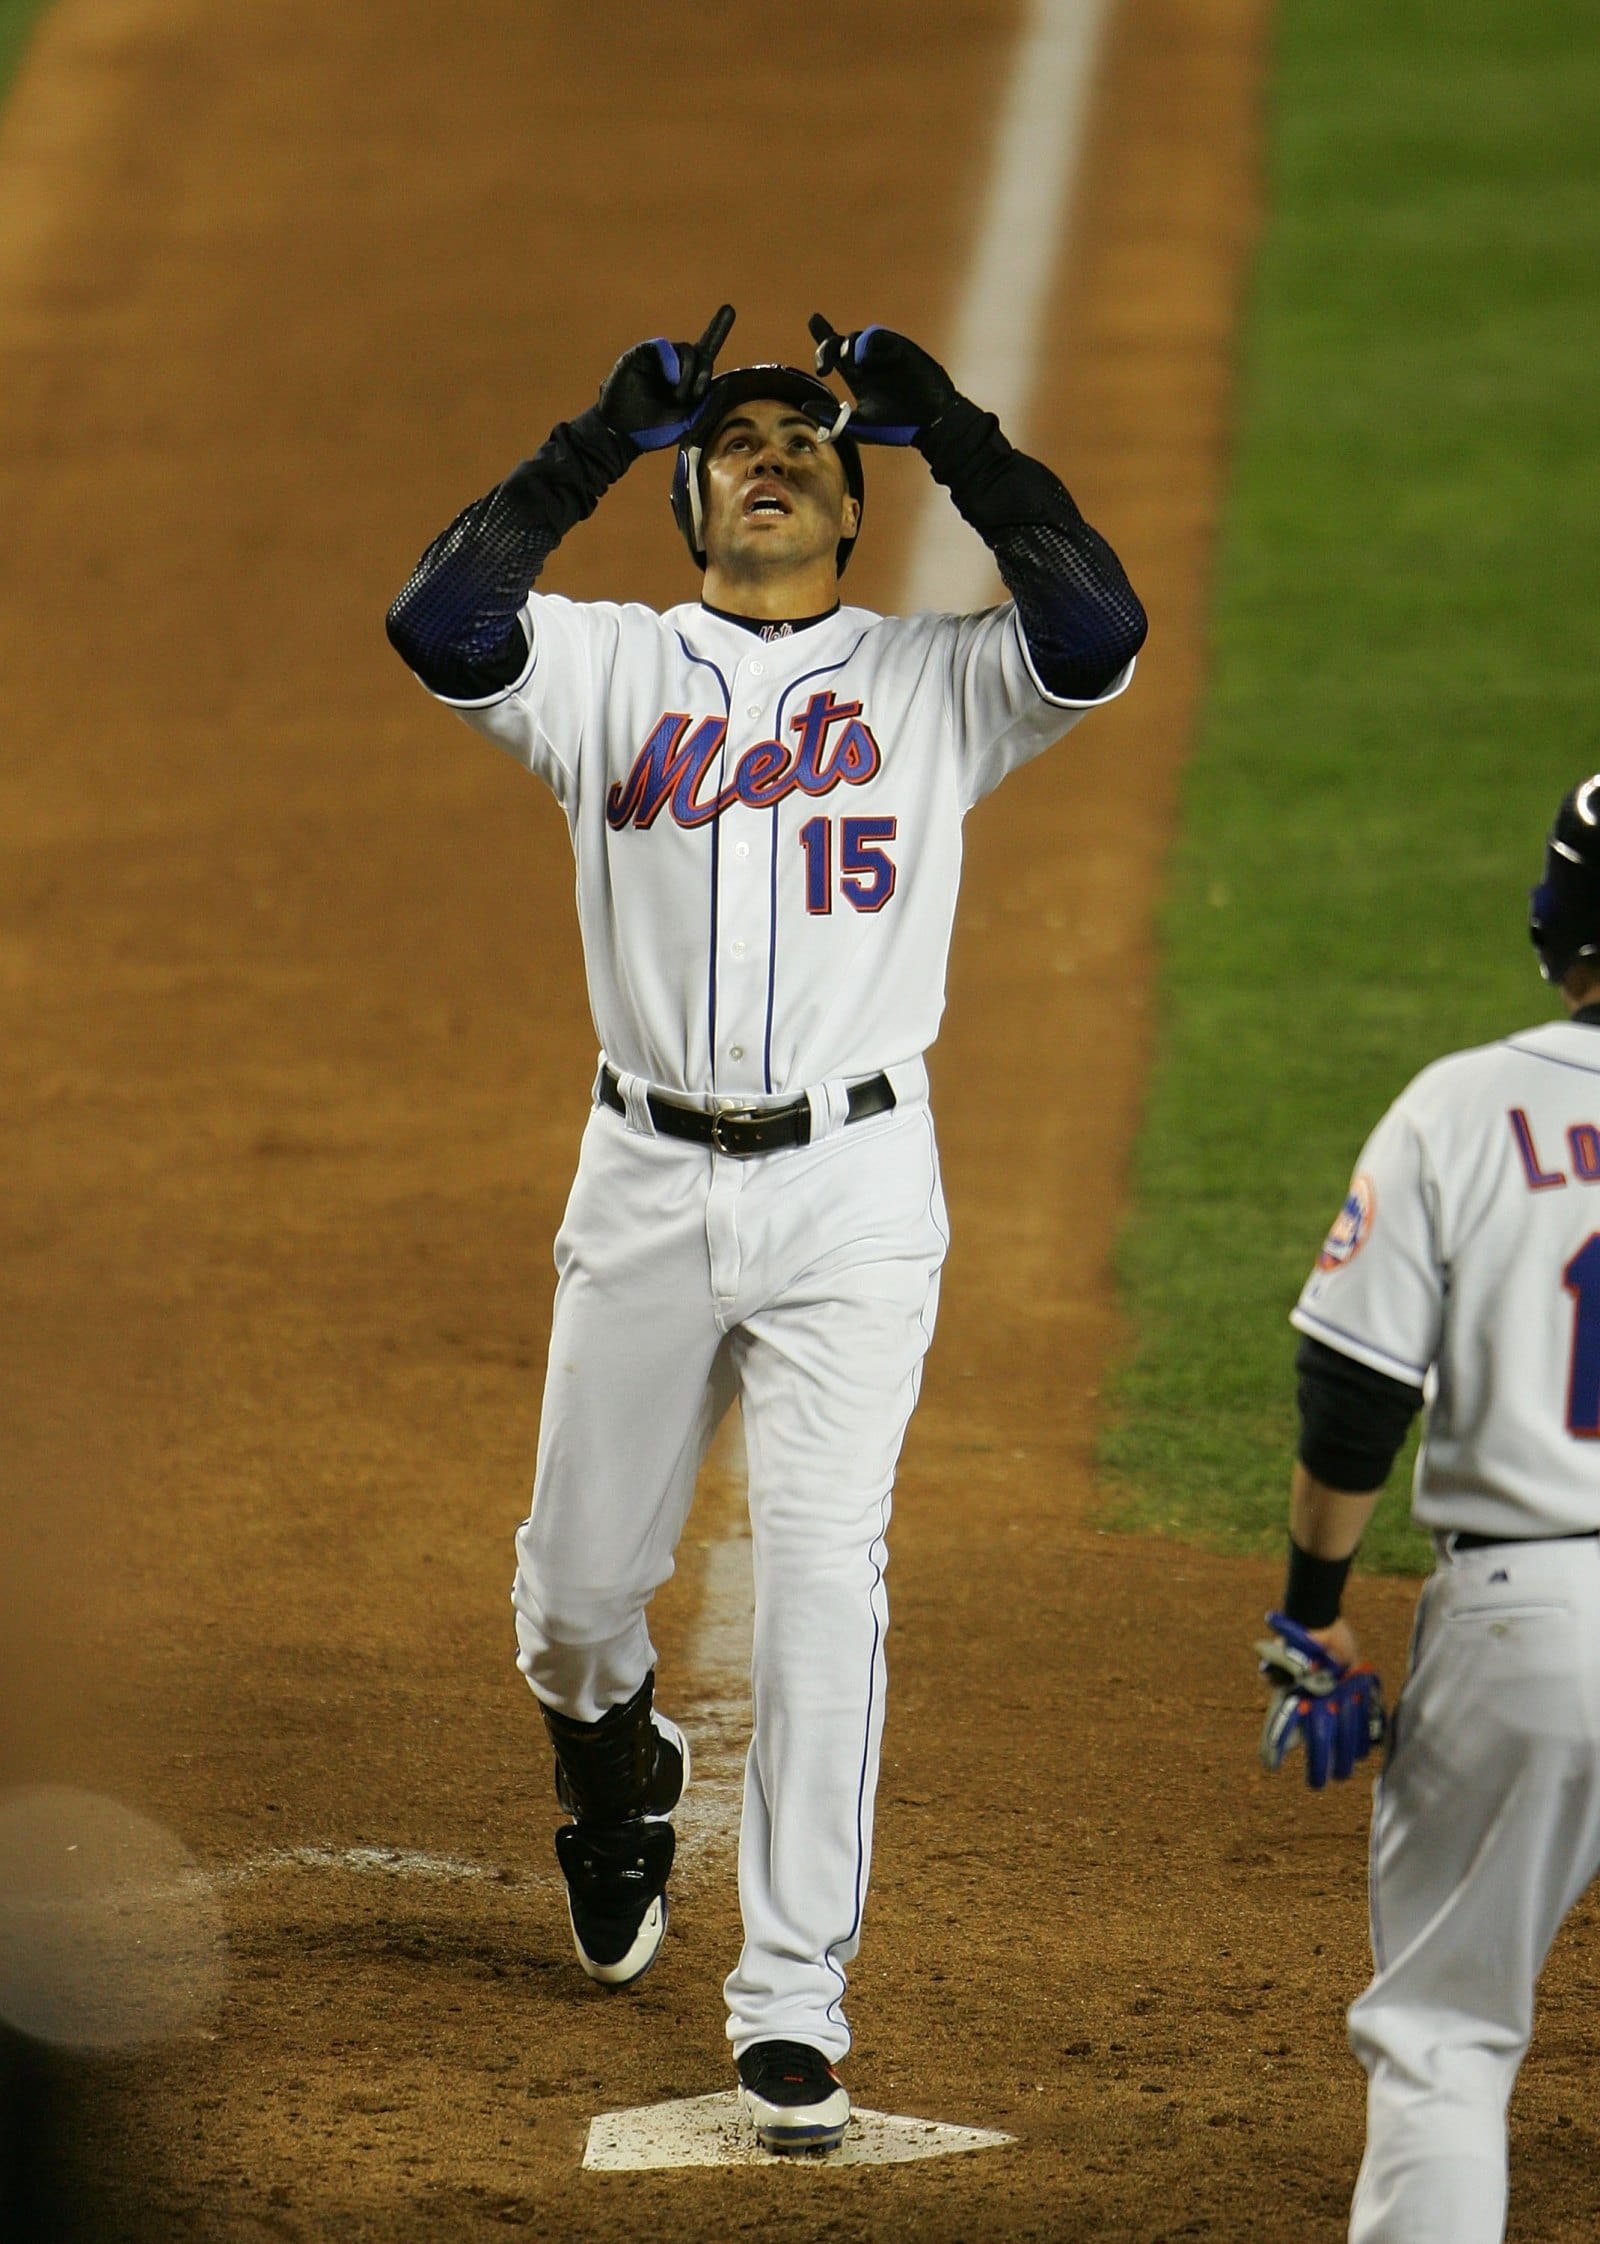 Mets: The 5 best offensive WAR seasons since 2000 - Page 2